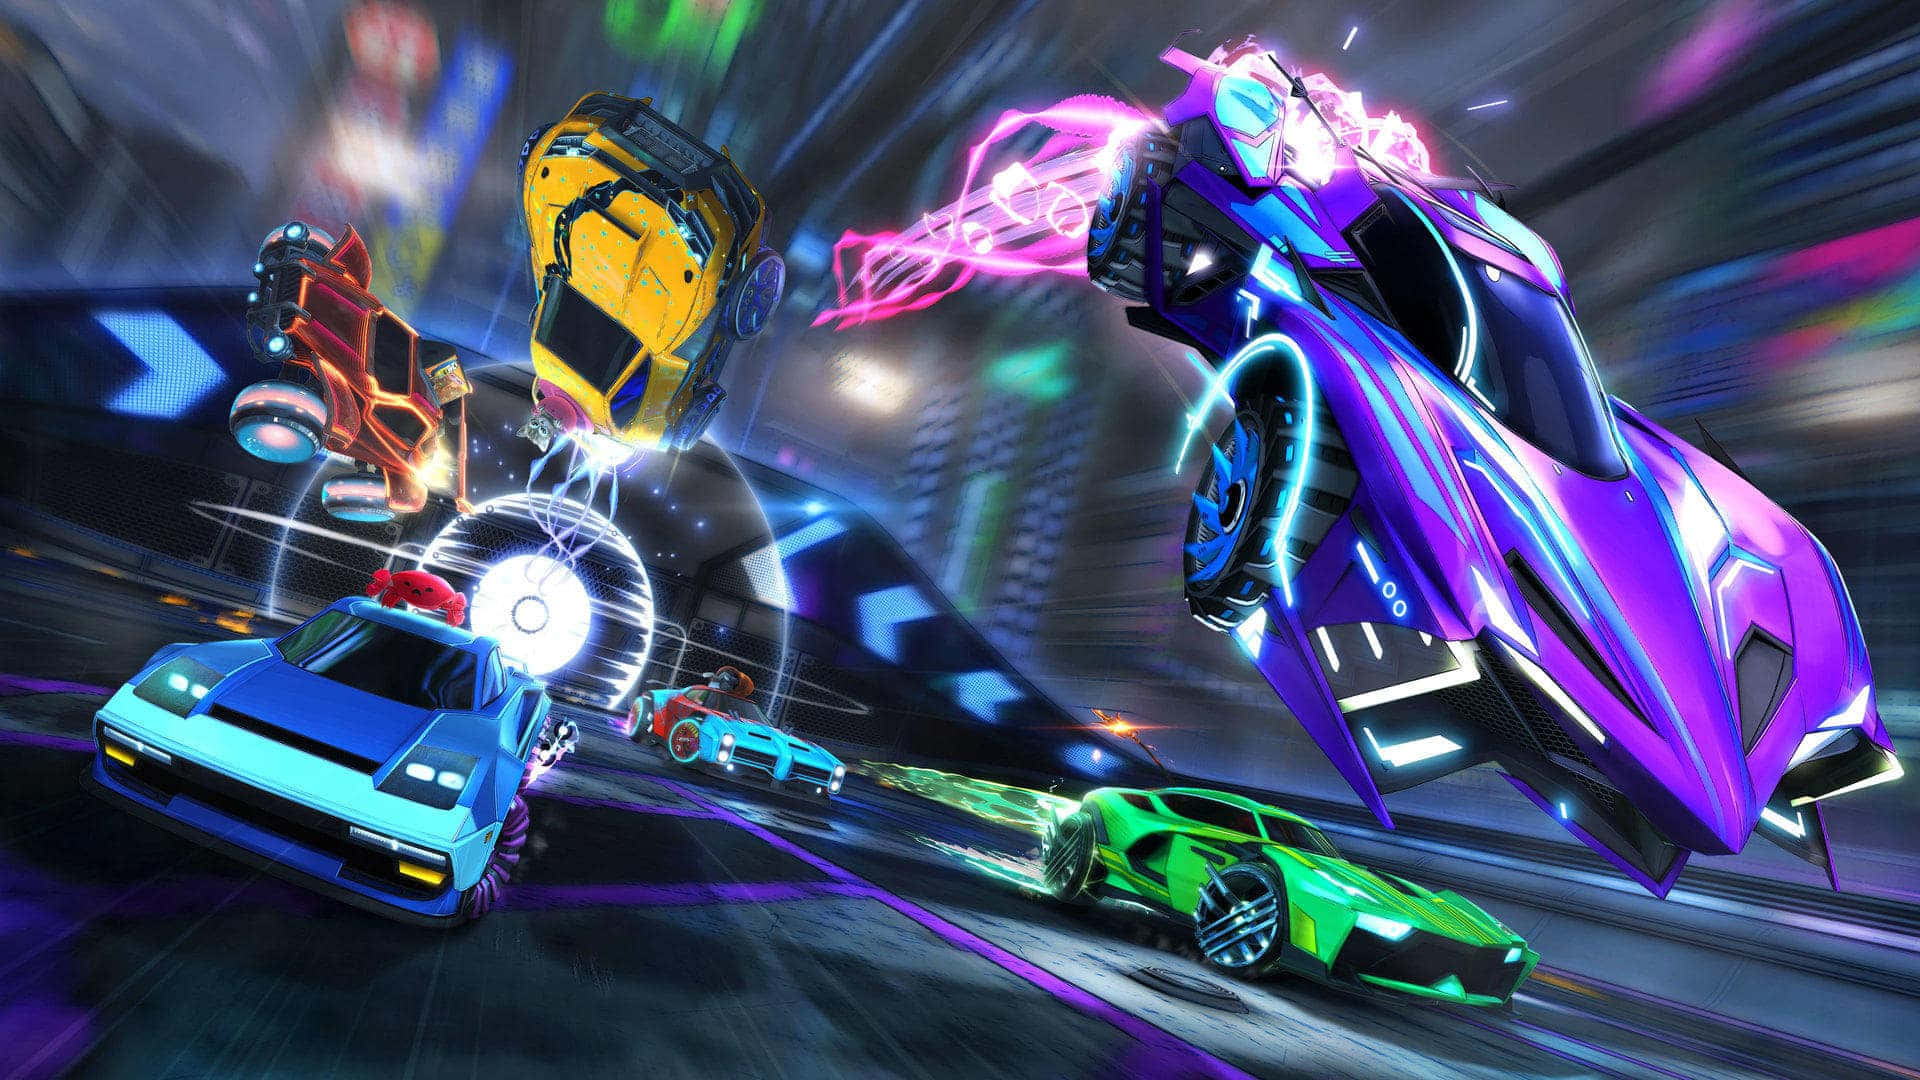 Enjoy the fast-paced and intense car-soccer video game, Rocket League! Wallpaper